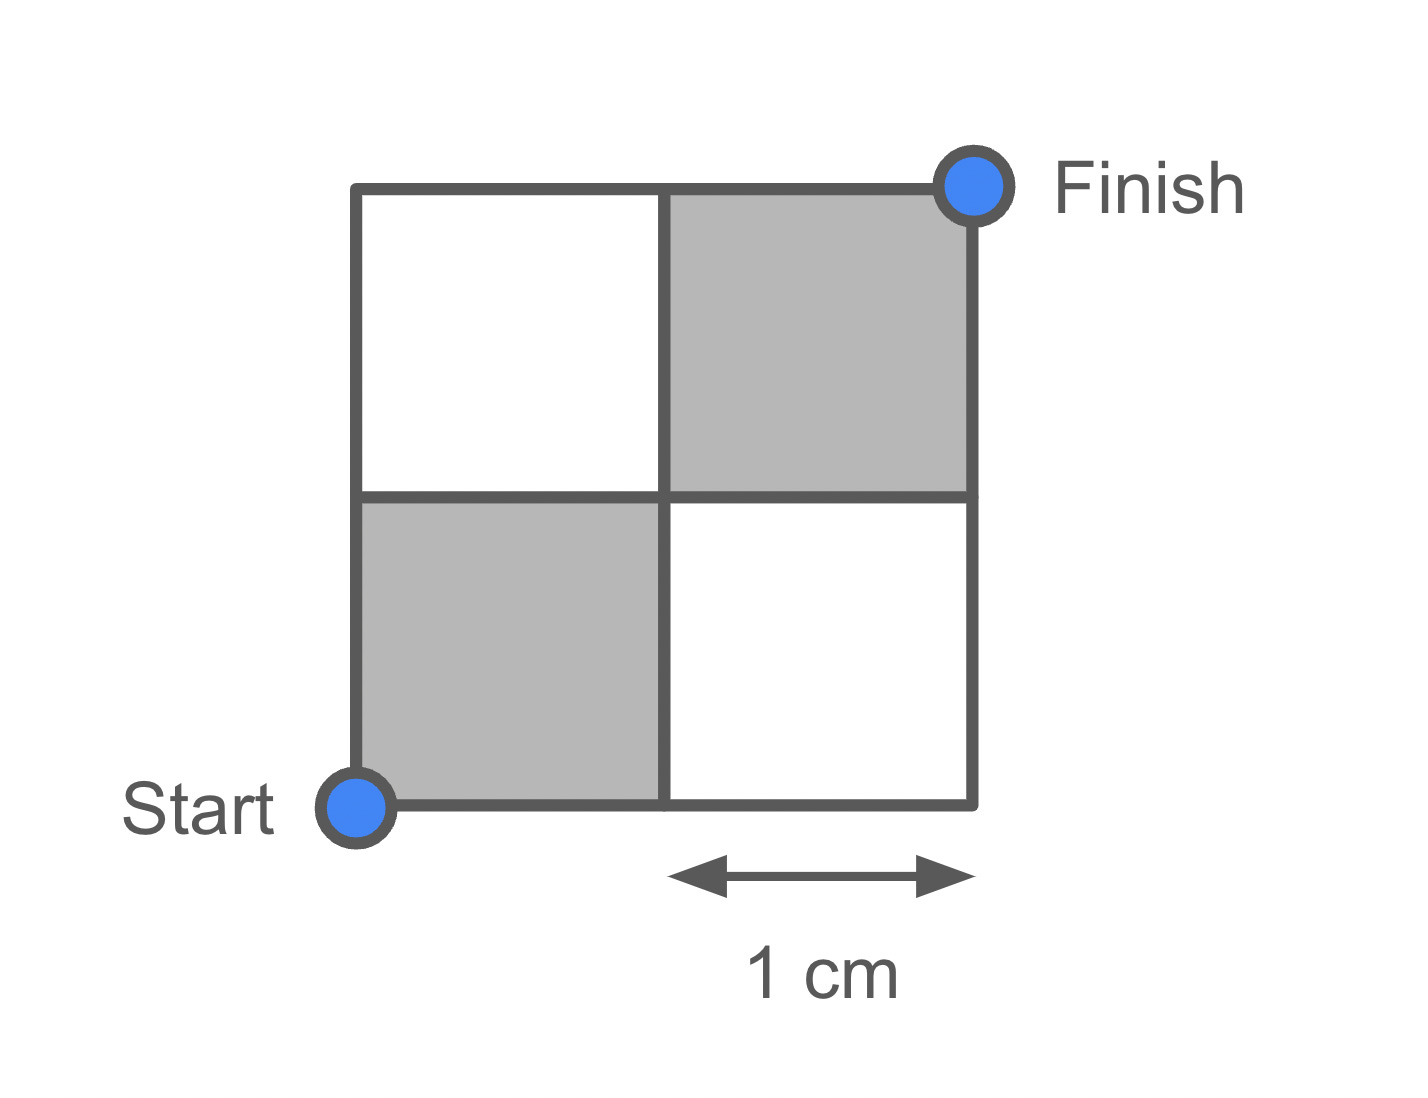 2-by-2 chess grid with black square in lower left. Squares have side length 1 cm. Bottom left corner is "Start," top right corner is "Finish."